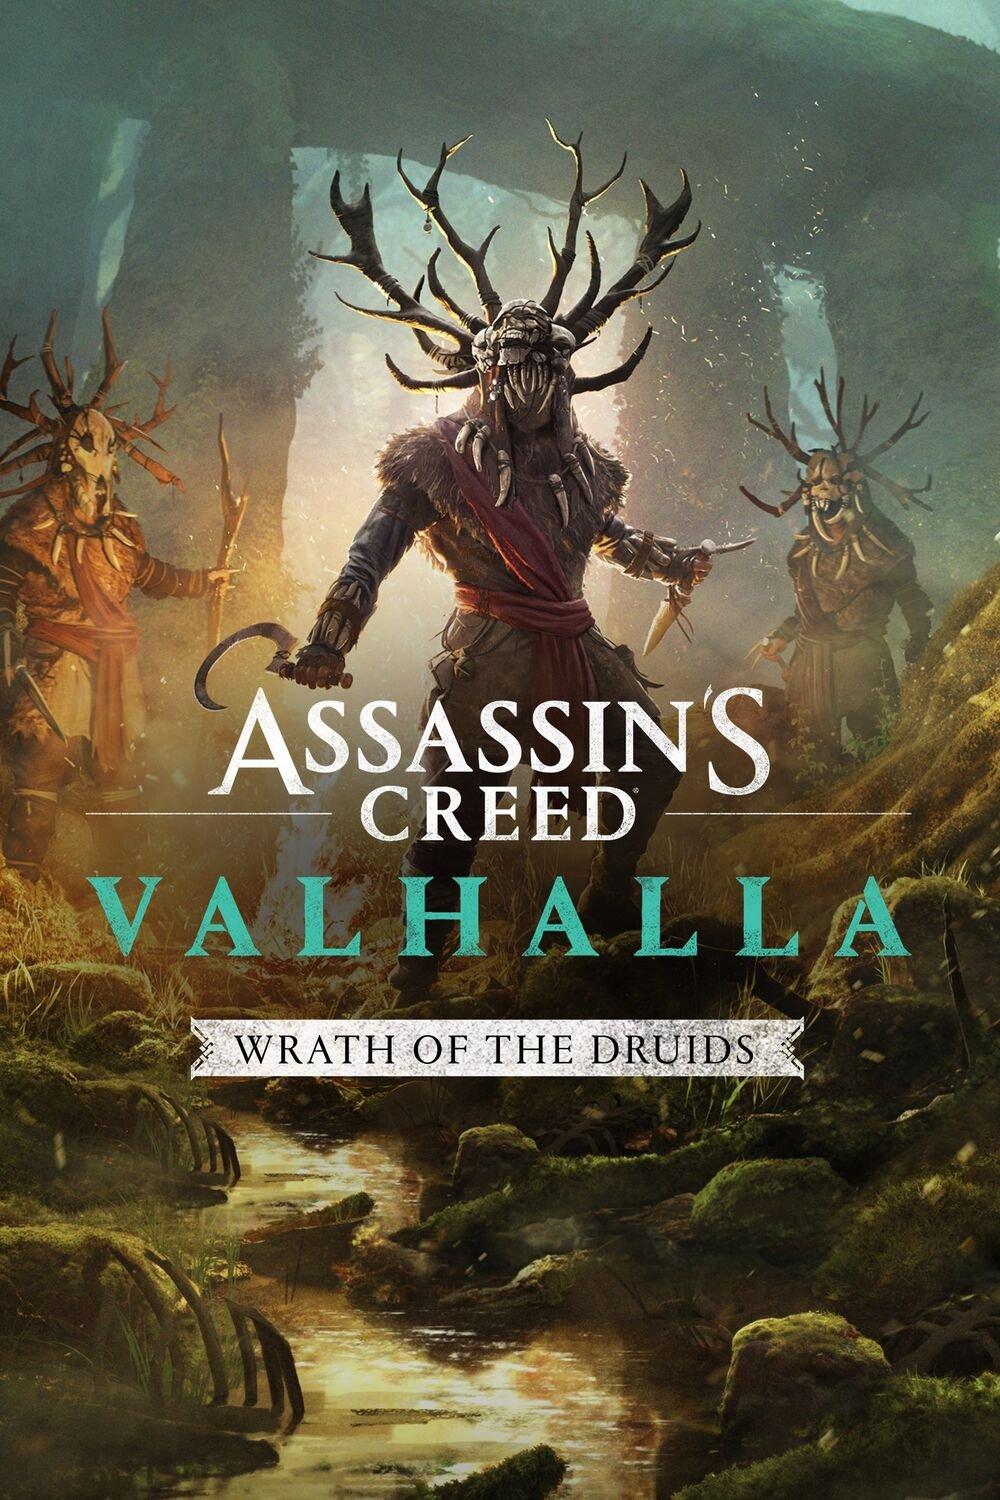 Assassin's Creed Valhalla: Wrath of the Druids DLC